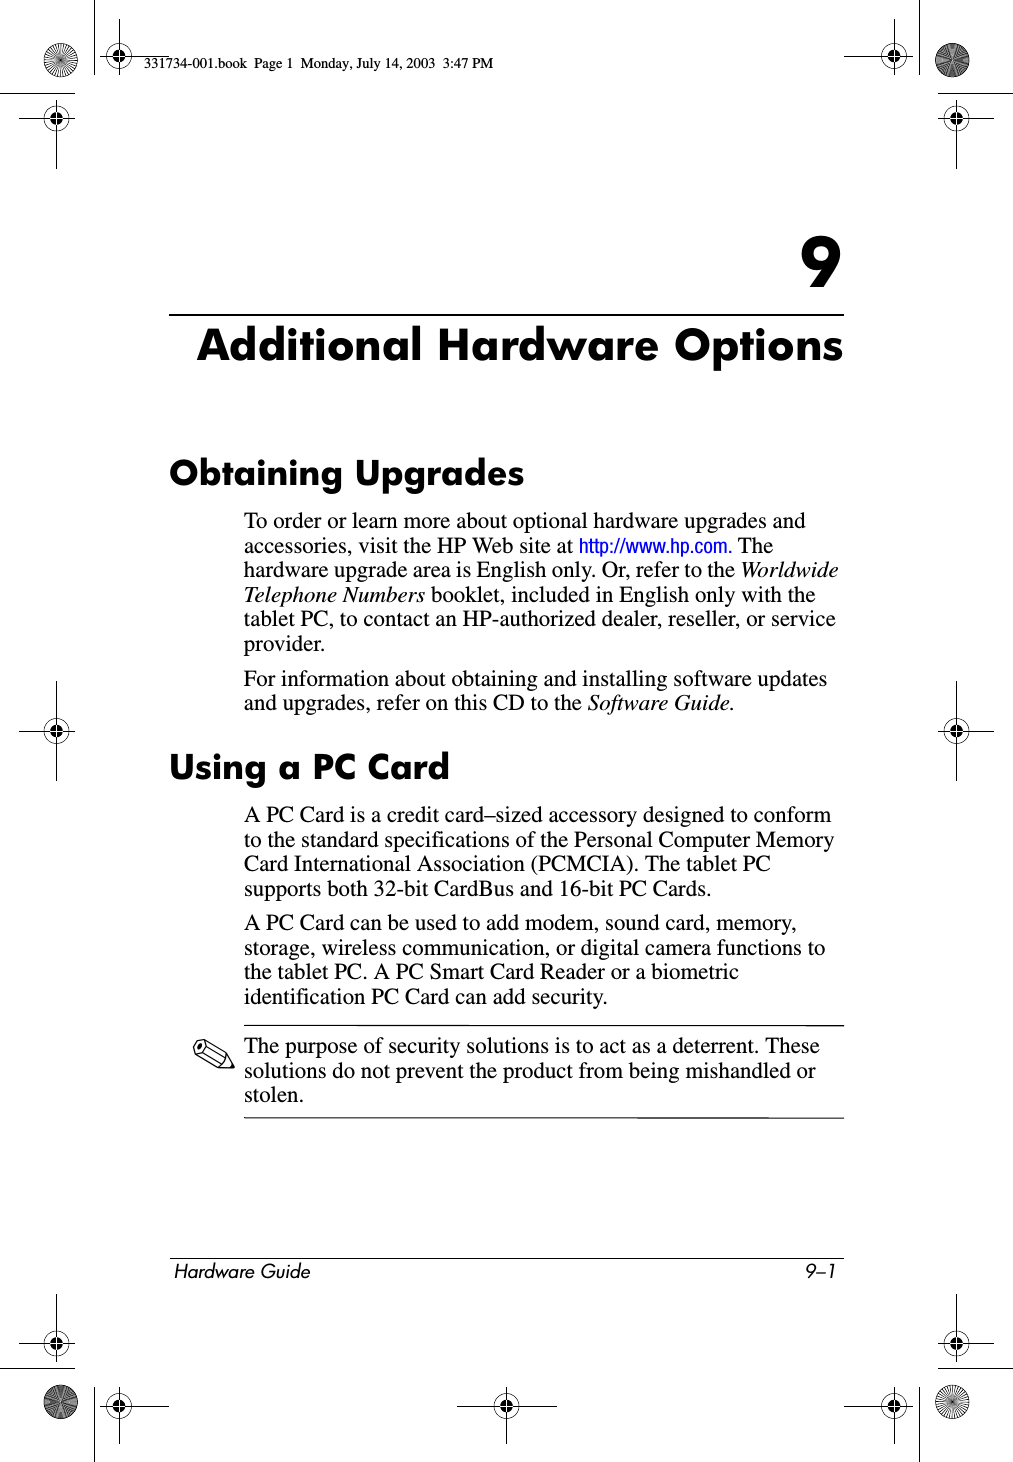 Hardware Guide 9–19Additional Hardware OptionsObtaining UpgradesTo order or learn more about optional hardware upgrades and accessories, visit the HP Web site at http://www.hp.com. The hardware upgrade area is English only. Or, refer to the Worldwid e Telephone Numbers booklet, included in English only with the tablet PC, to contact an HP-authorized dealer, reseller, or service provider.For information about obtaining and installing software updates and upgrades, refer on this CD to the Software Guide.Using a PC CardA PC Card is a credit card–sized accessory designed to conform to the standard specifications of the Personal Computer Memory Card International Association (PCMCIA). The tablet PC supports both 32-bit CardBus and 16-bit PC Cards.A PC Card can be used to add modem, sound card, memory, storage, wireless communication, or digital camera functions to the tablet PC. A PC Smart Card Reader or a biometric identification PC Card can add security.✎The purpose of security solutions is to act as a deterrent. These solutions do not prevent the product from being mishandled or stolen.331734-001.book  Page 1  Monday, July 14, 2003  3:47 PM